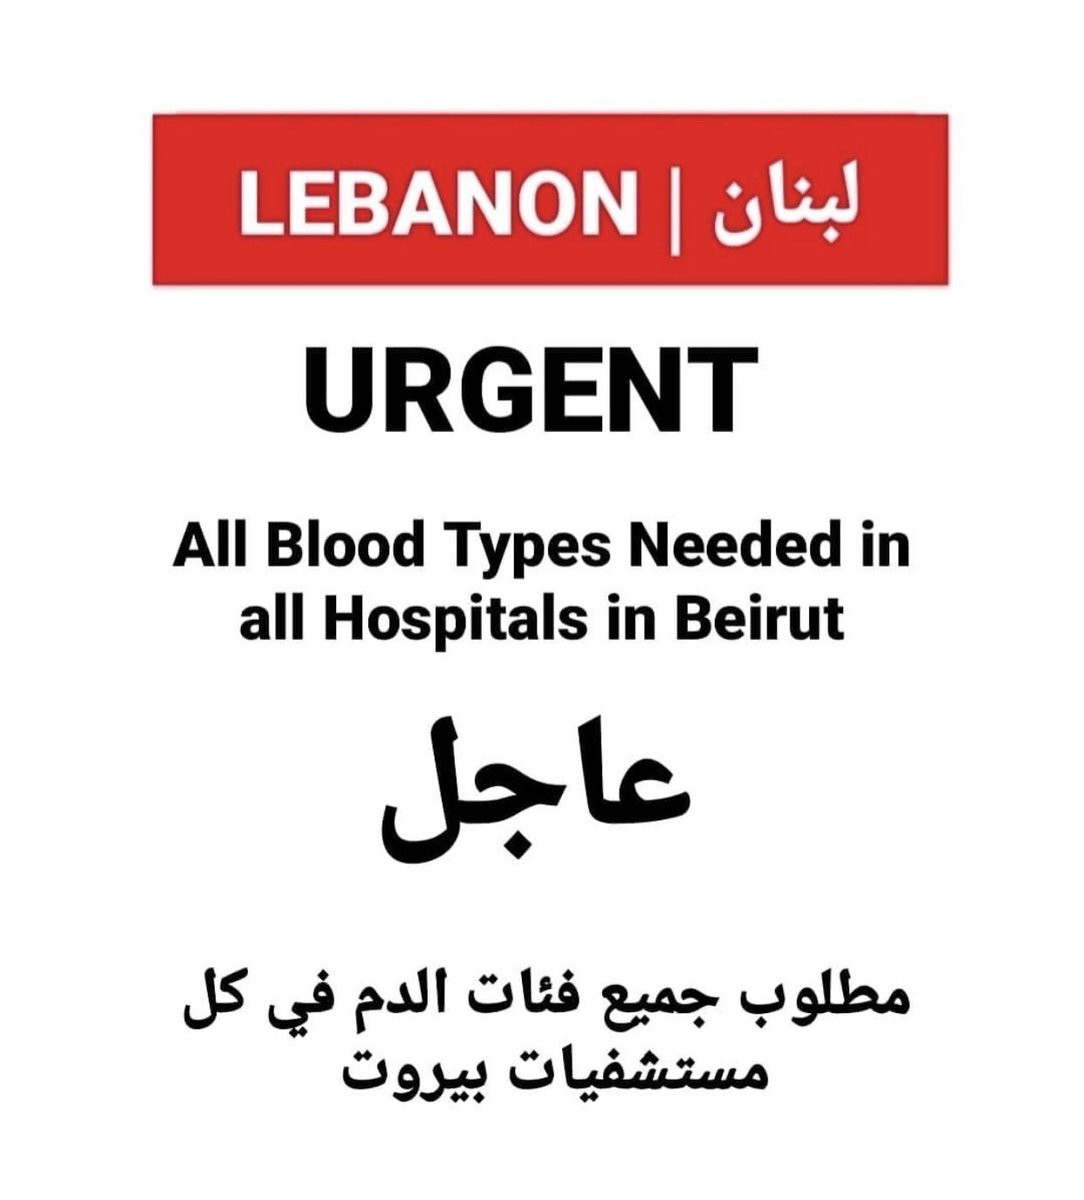 They currently have no electricity, even firefighters are missing, many have lost limbs, and the Lebanese Red Cross is in need of blood donations.